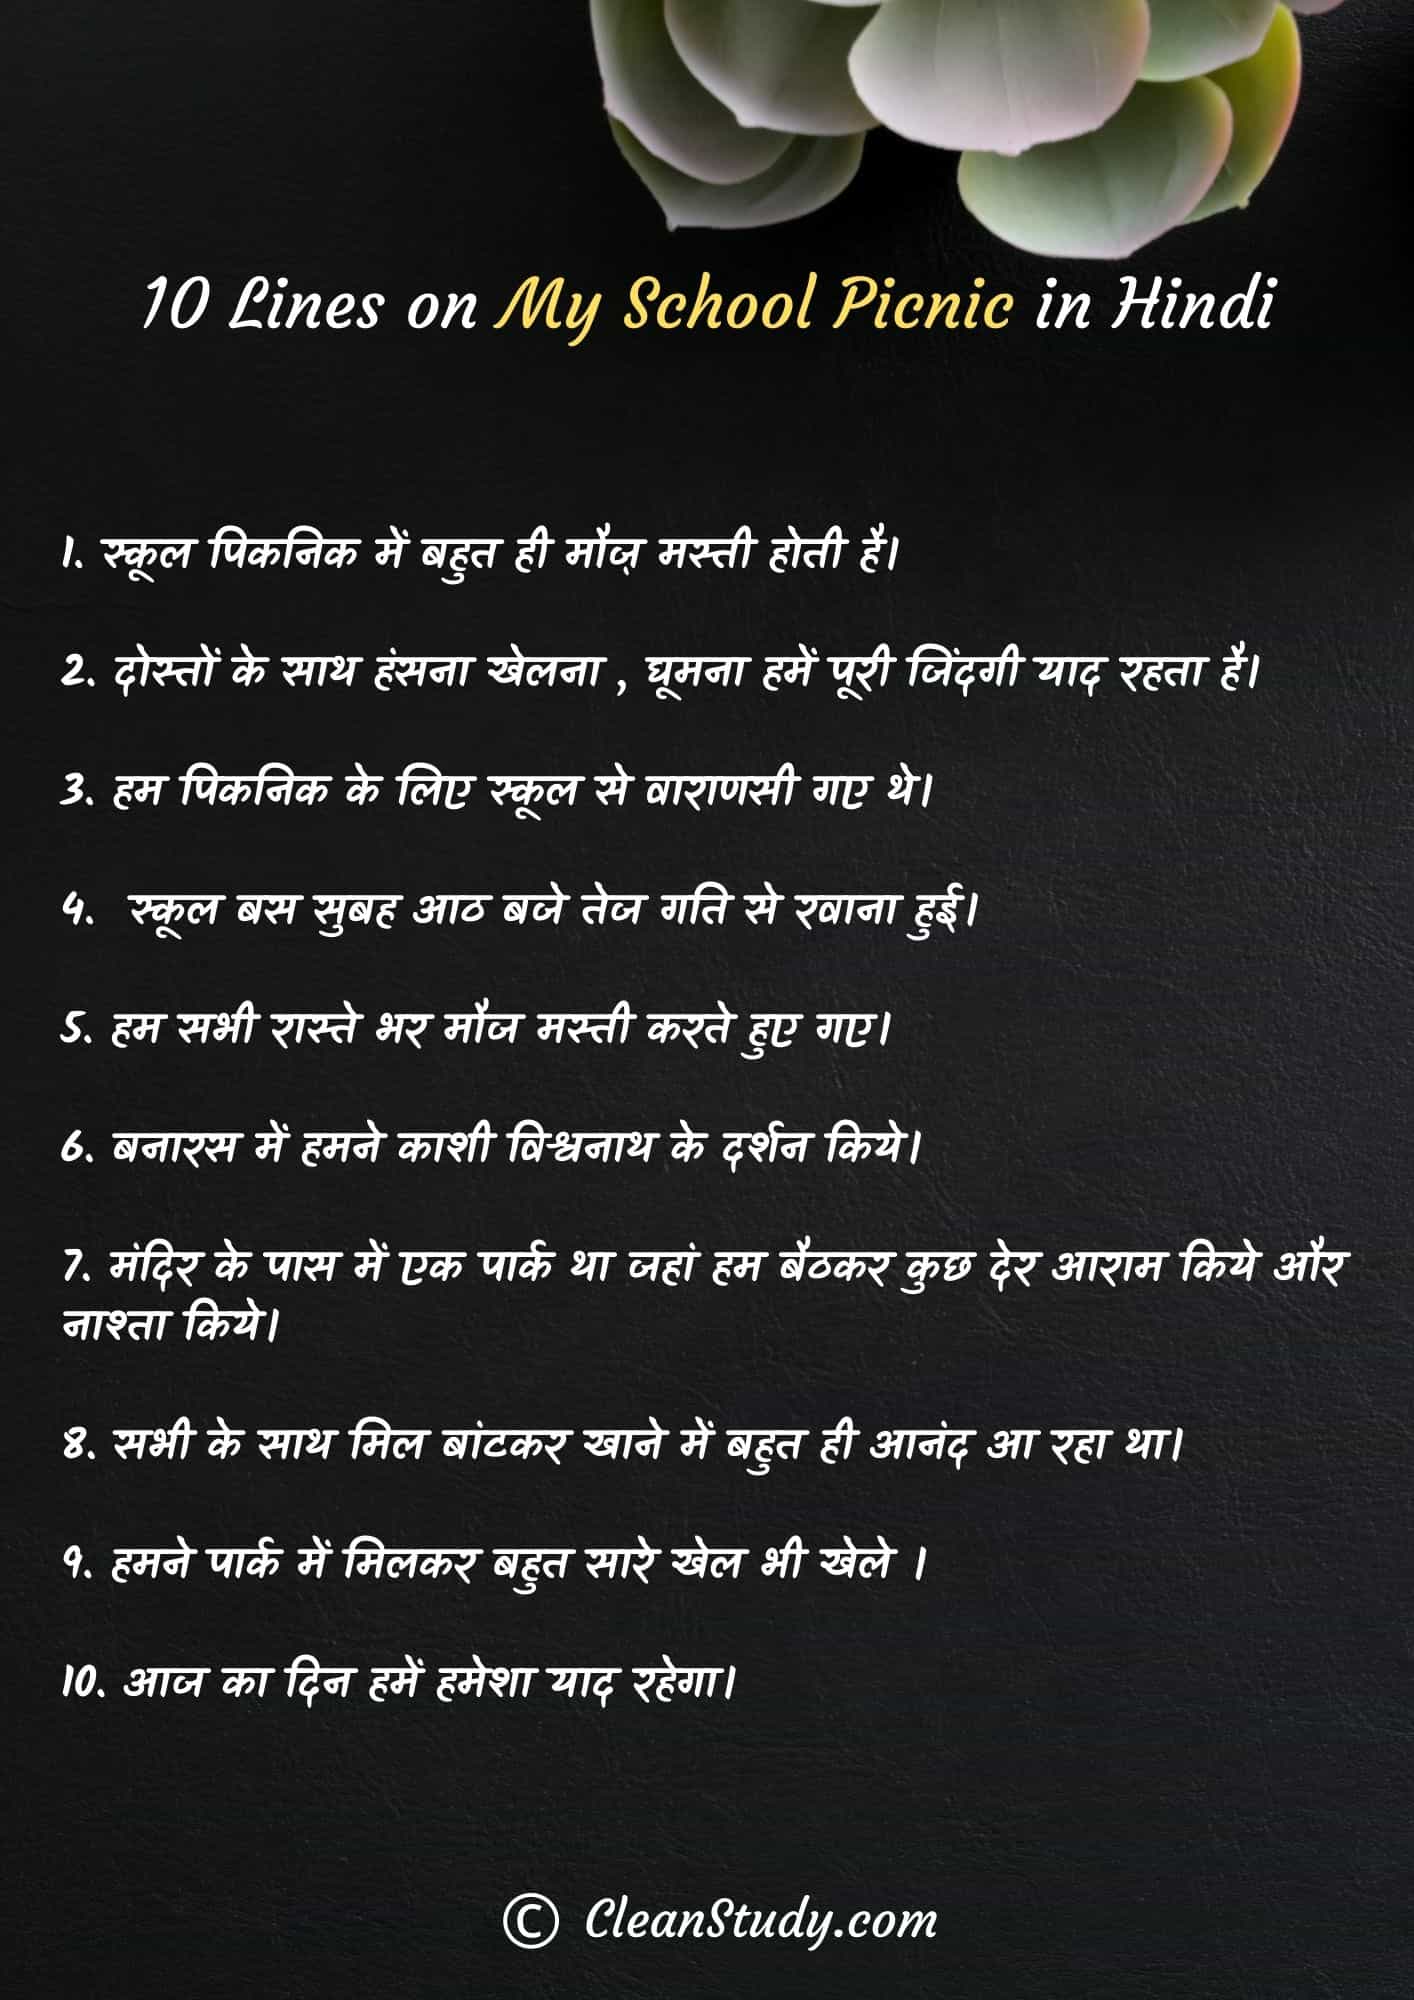 10 Lines on My School Picnic in Hindi